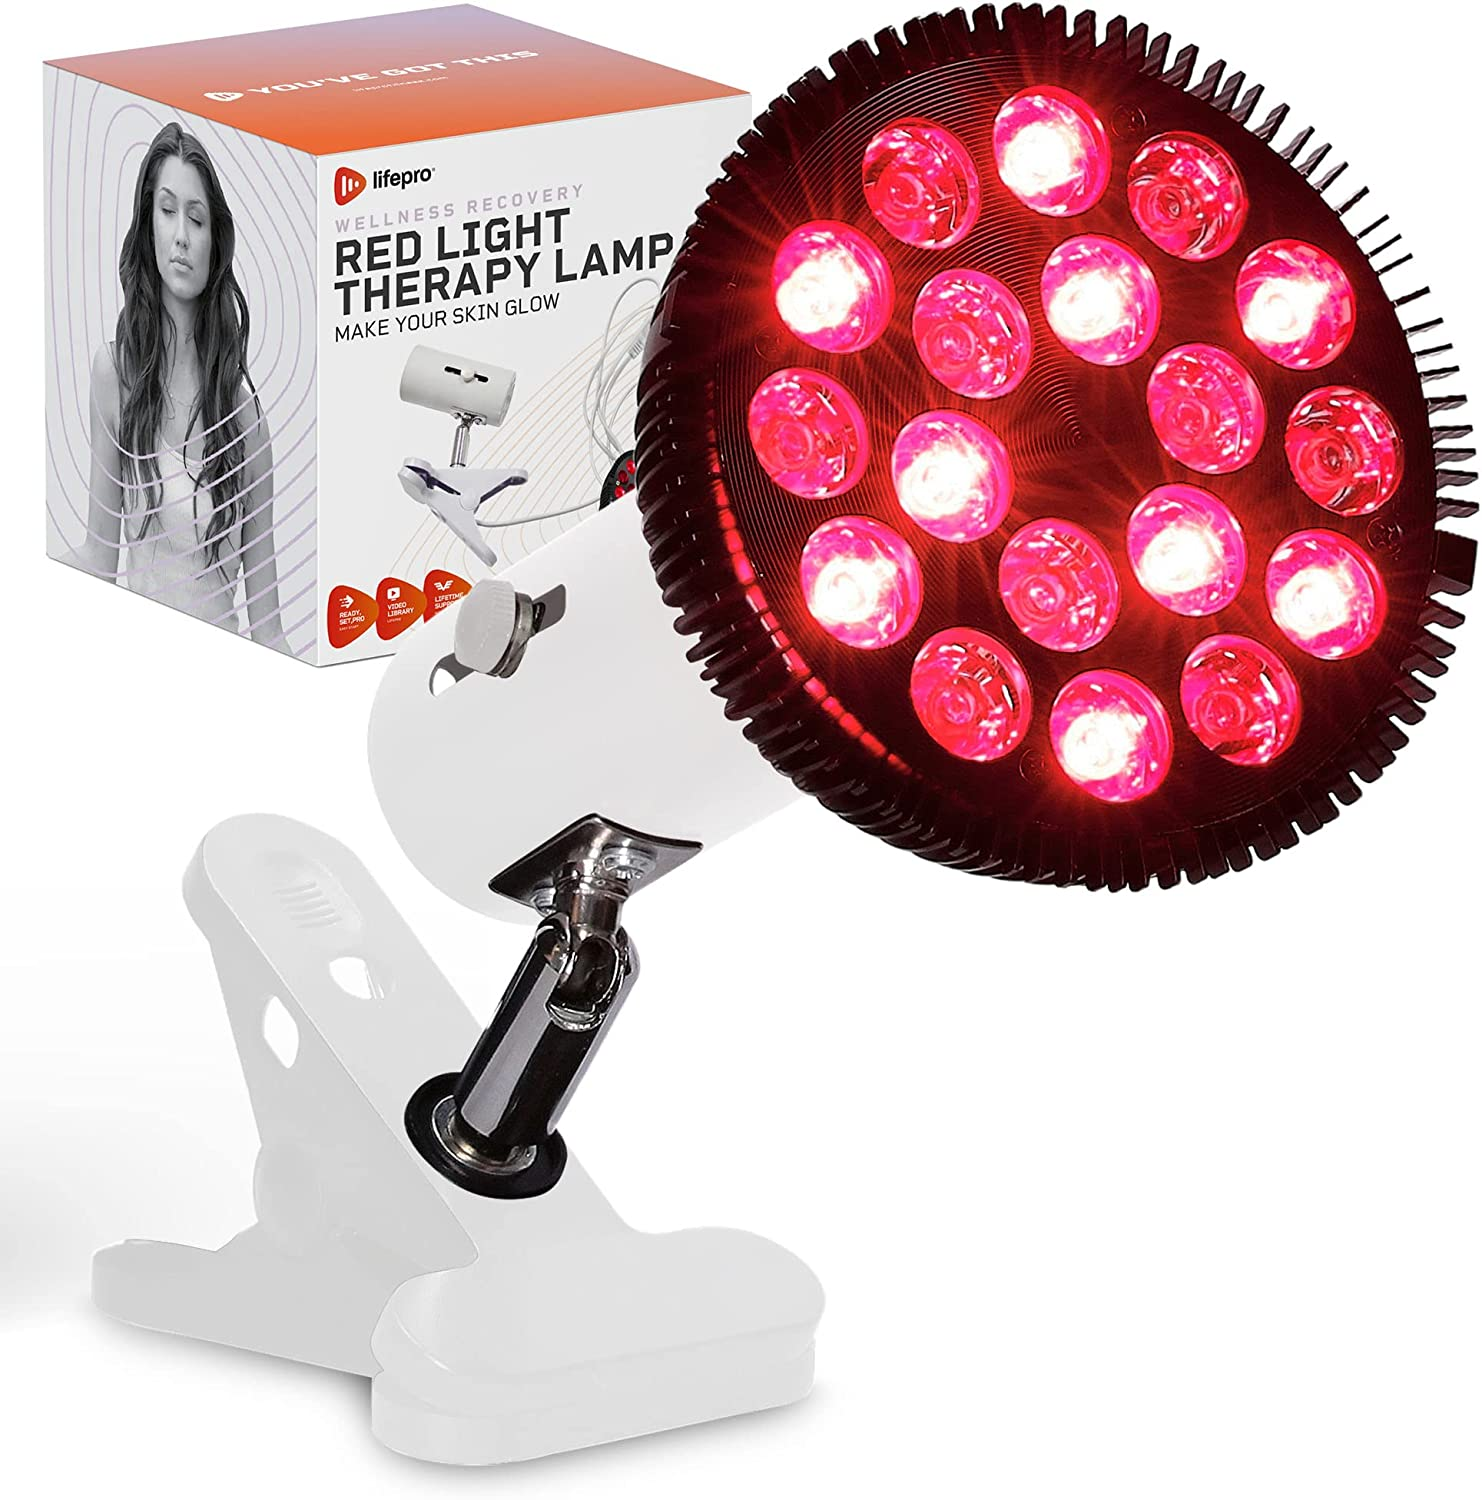 InfraGlow NIR & Red Light Therapy Lamp - Infrared Red Light Therapy Bulb with 18 LEDs & Clip-On Lamp - at-Home Red Light Therapy for Body, Chronic Pain Relief, Skin Wellness, & Recovery Accelaration